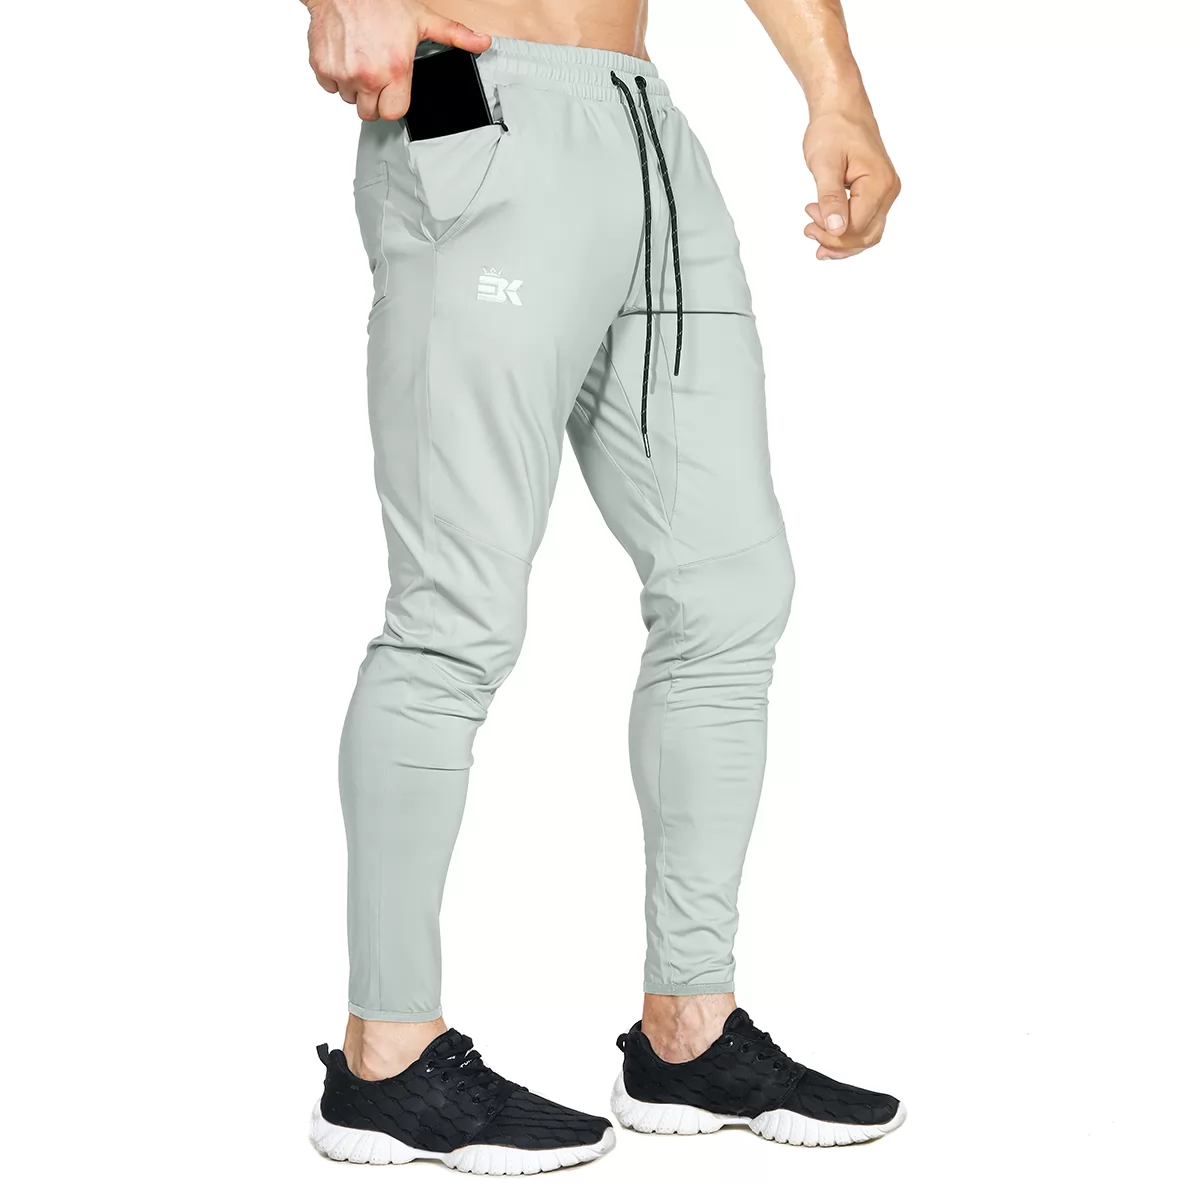 BROKIG Mens Gym Jogger Track Pants,Casual Slim fit Athletic Workout Training Sweatpants with Cargo Zipper Pockets